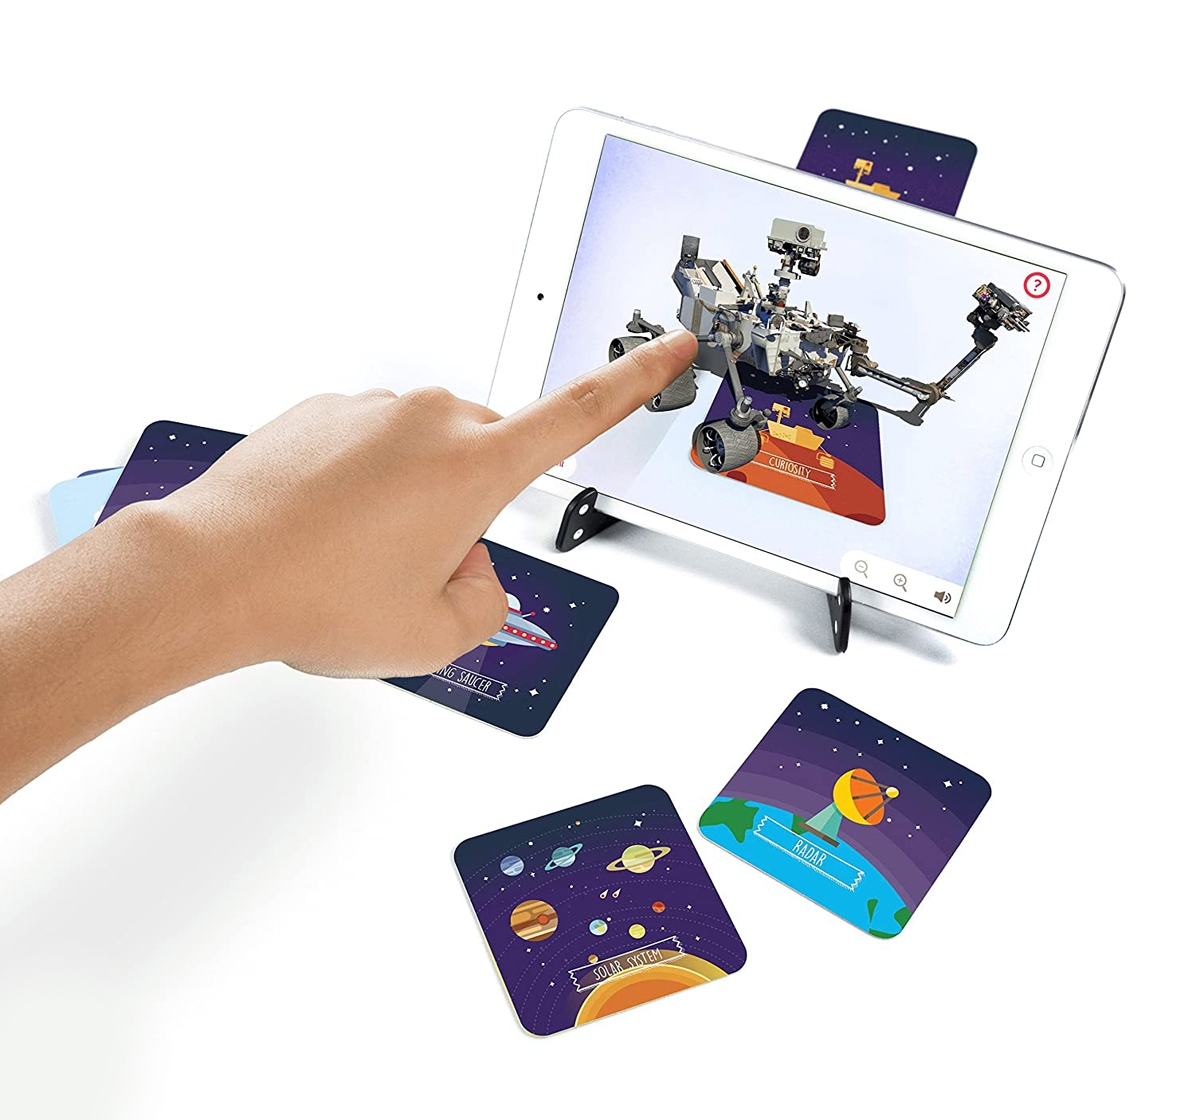 Playshifu | Playshifu iOS And Android Augmented Reality Space Educational Game, Black Science Kits for Kids age 5Y+  2